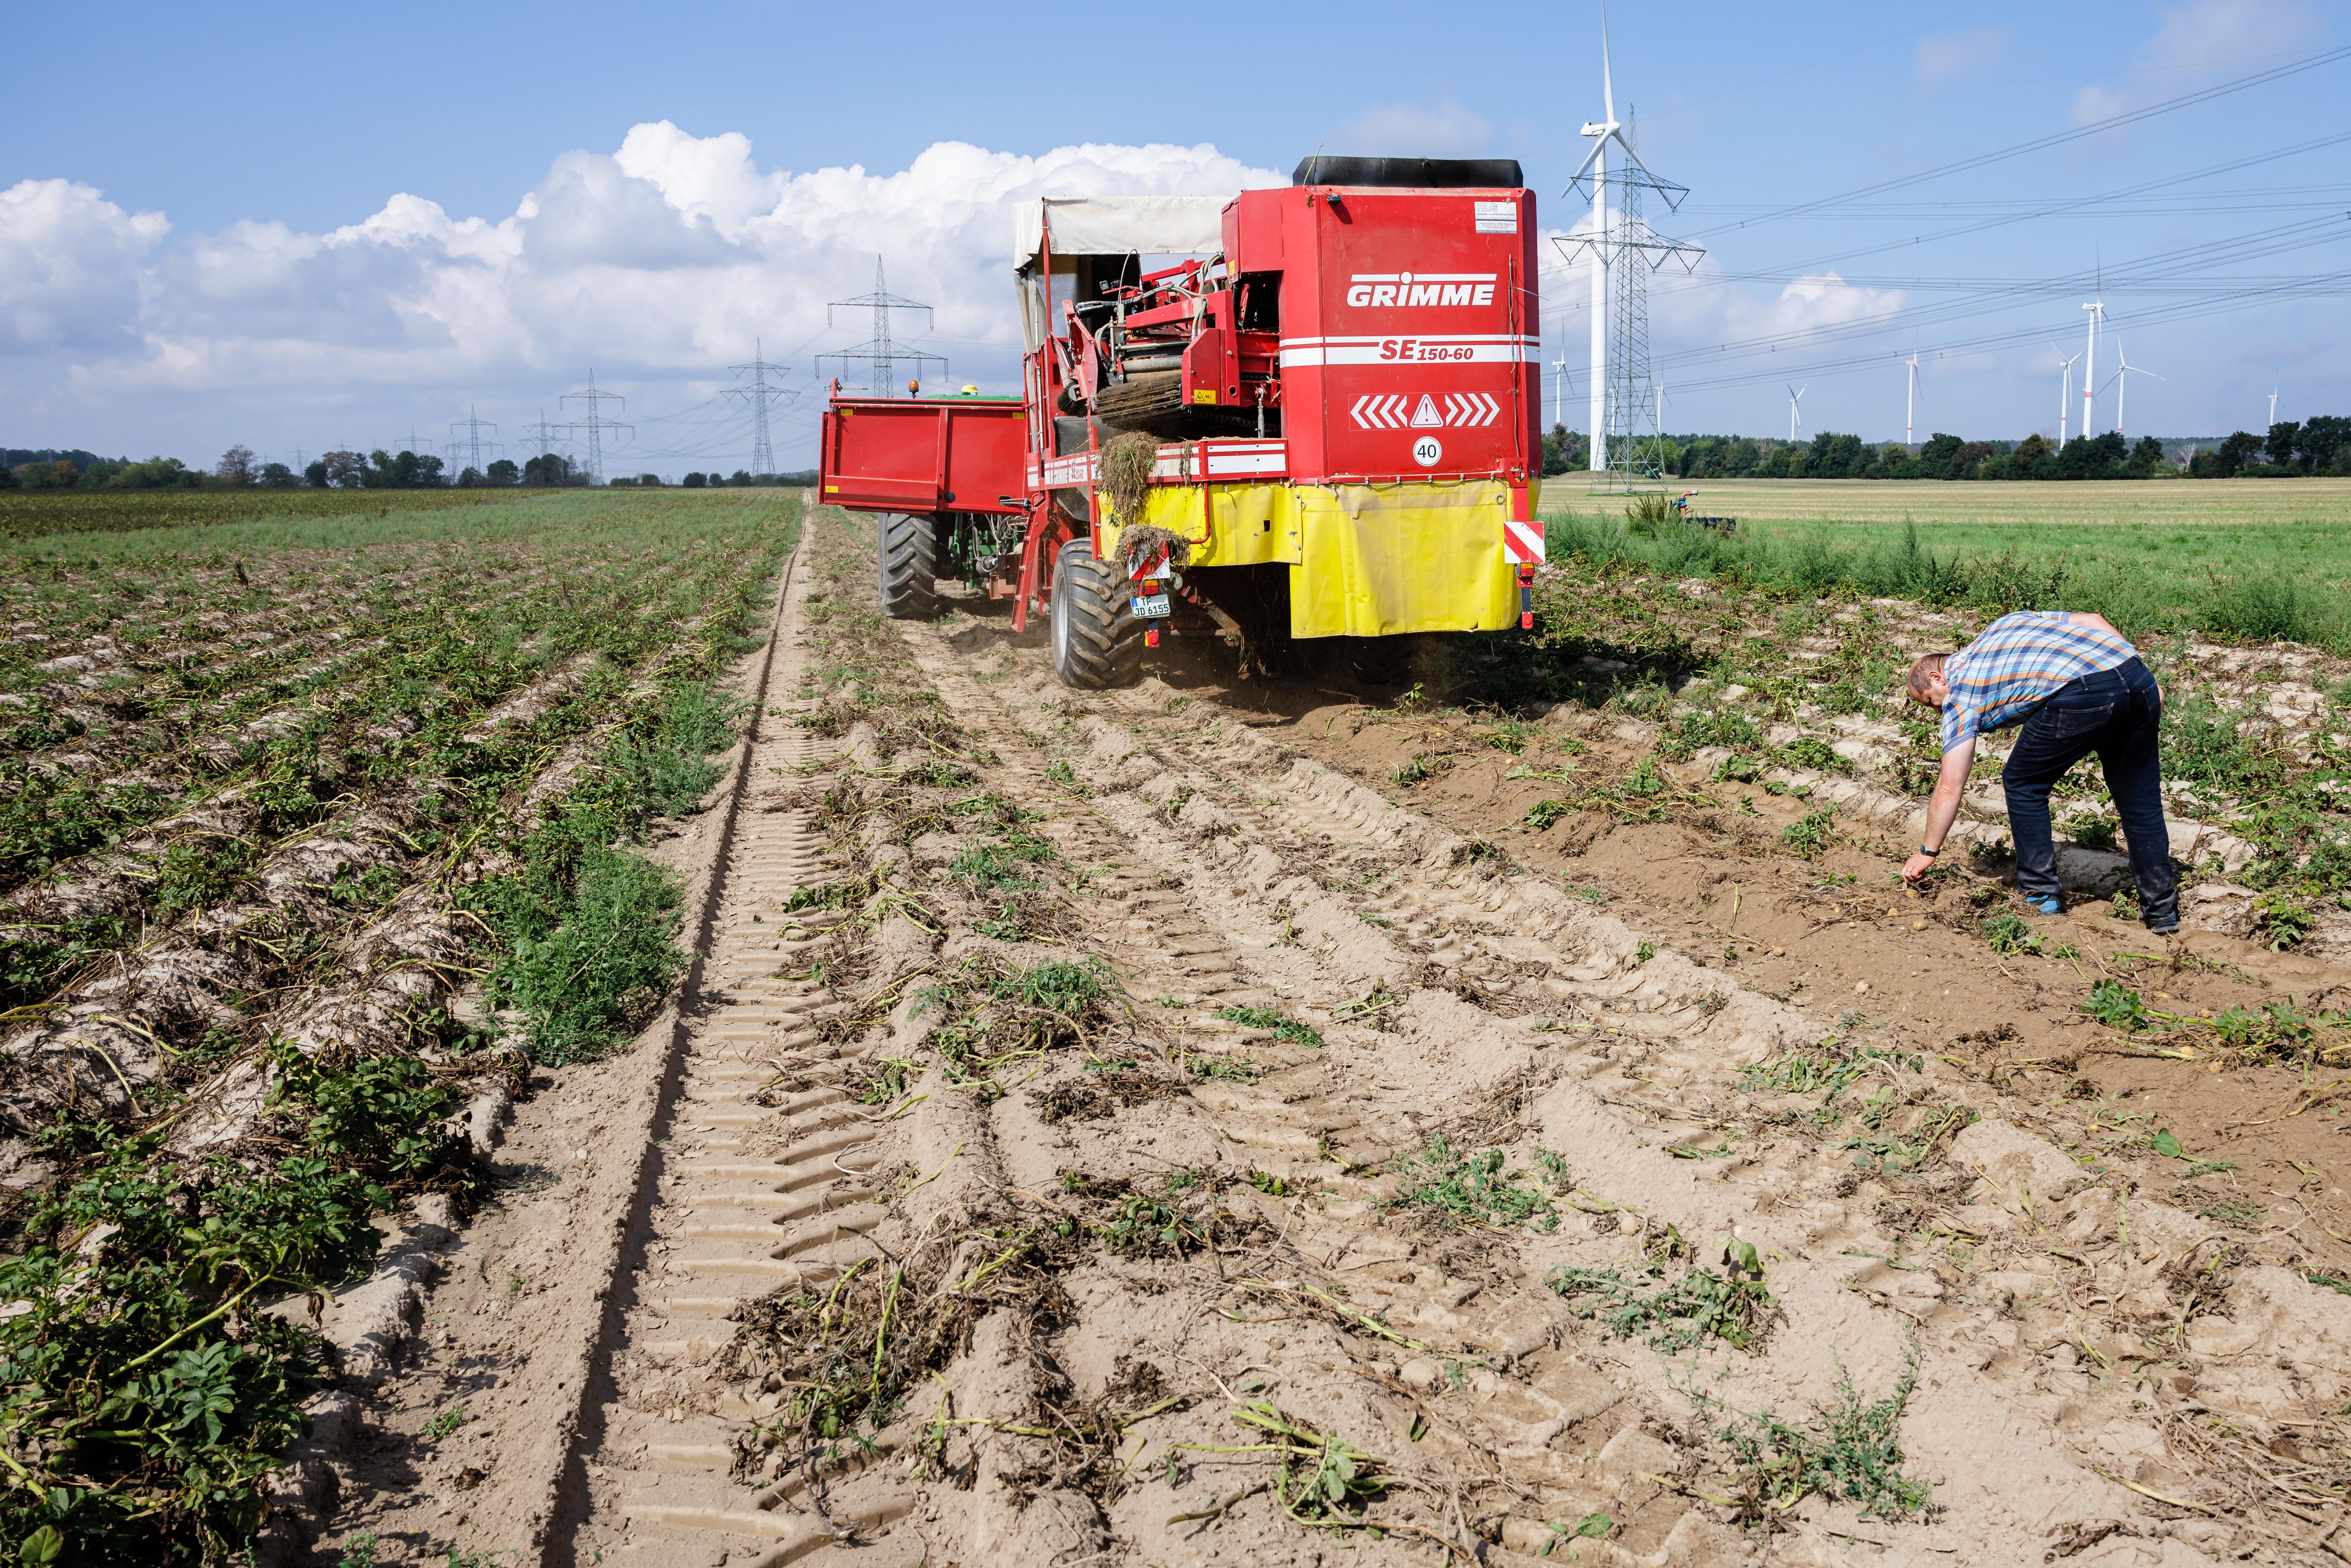 A large, red potato harvesting machine in a dry, dusty field, with lines of low green plants. Next to the machine, a man hunches over, grabbing something in the dirt.